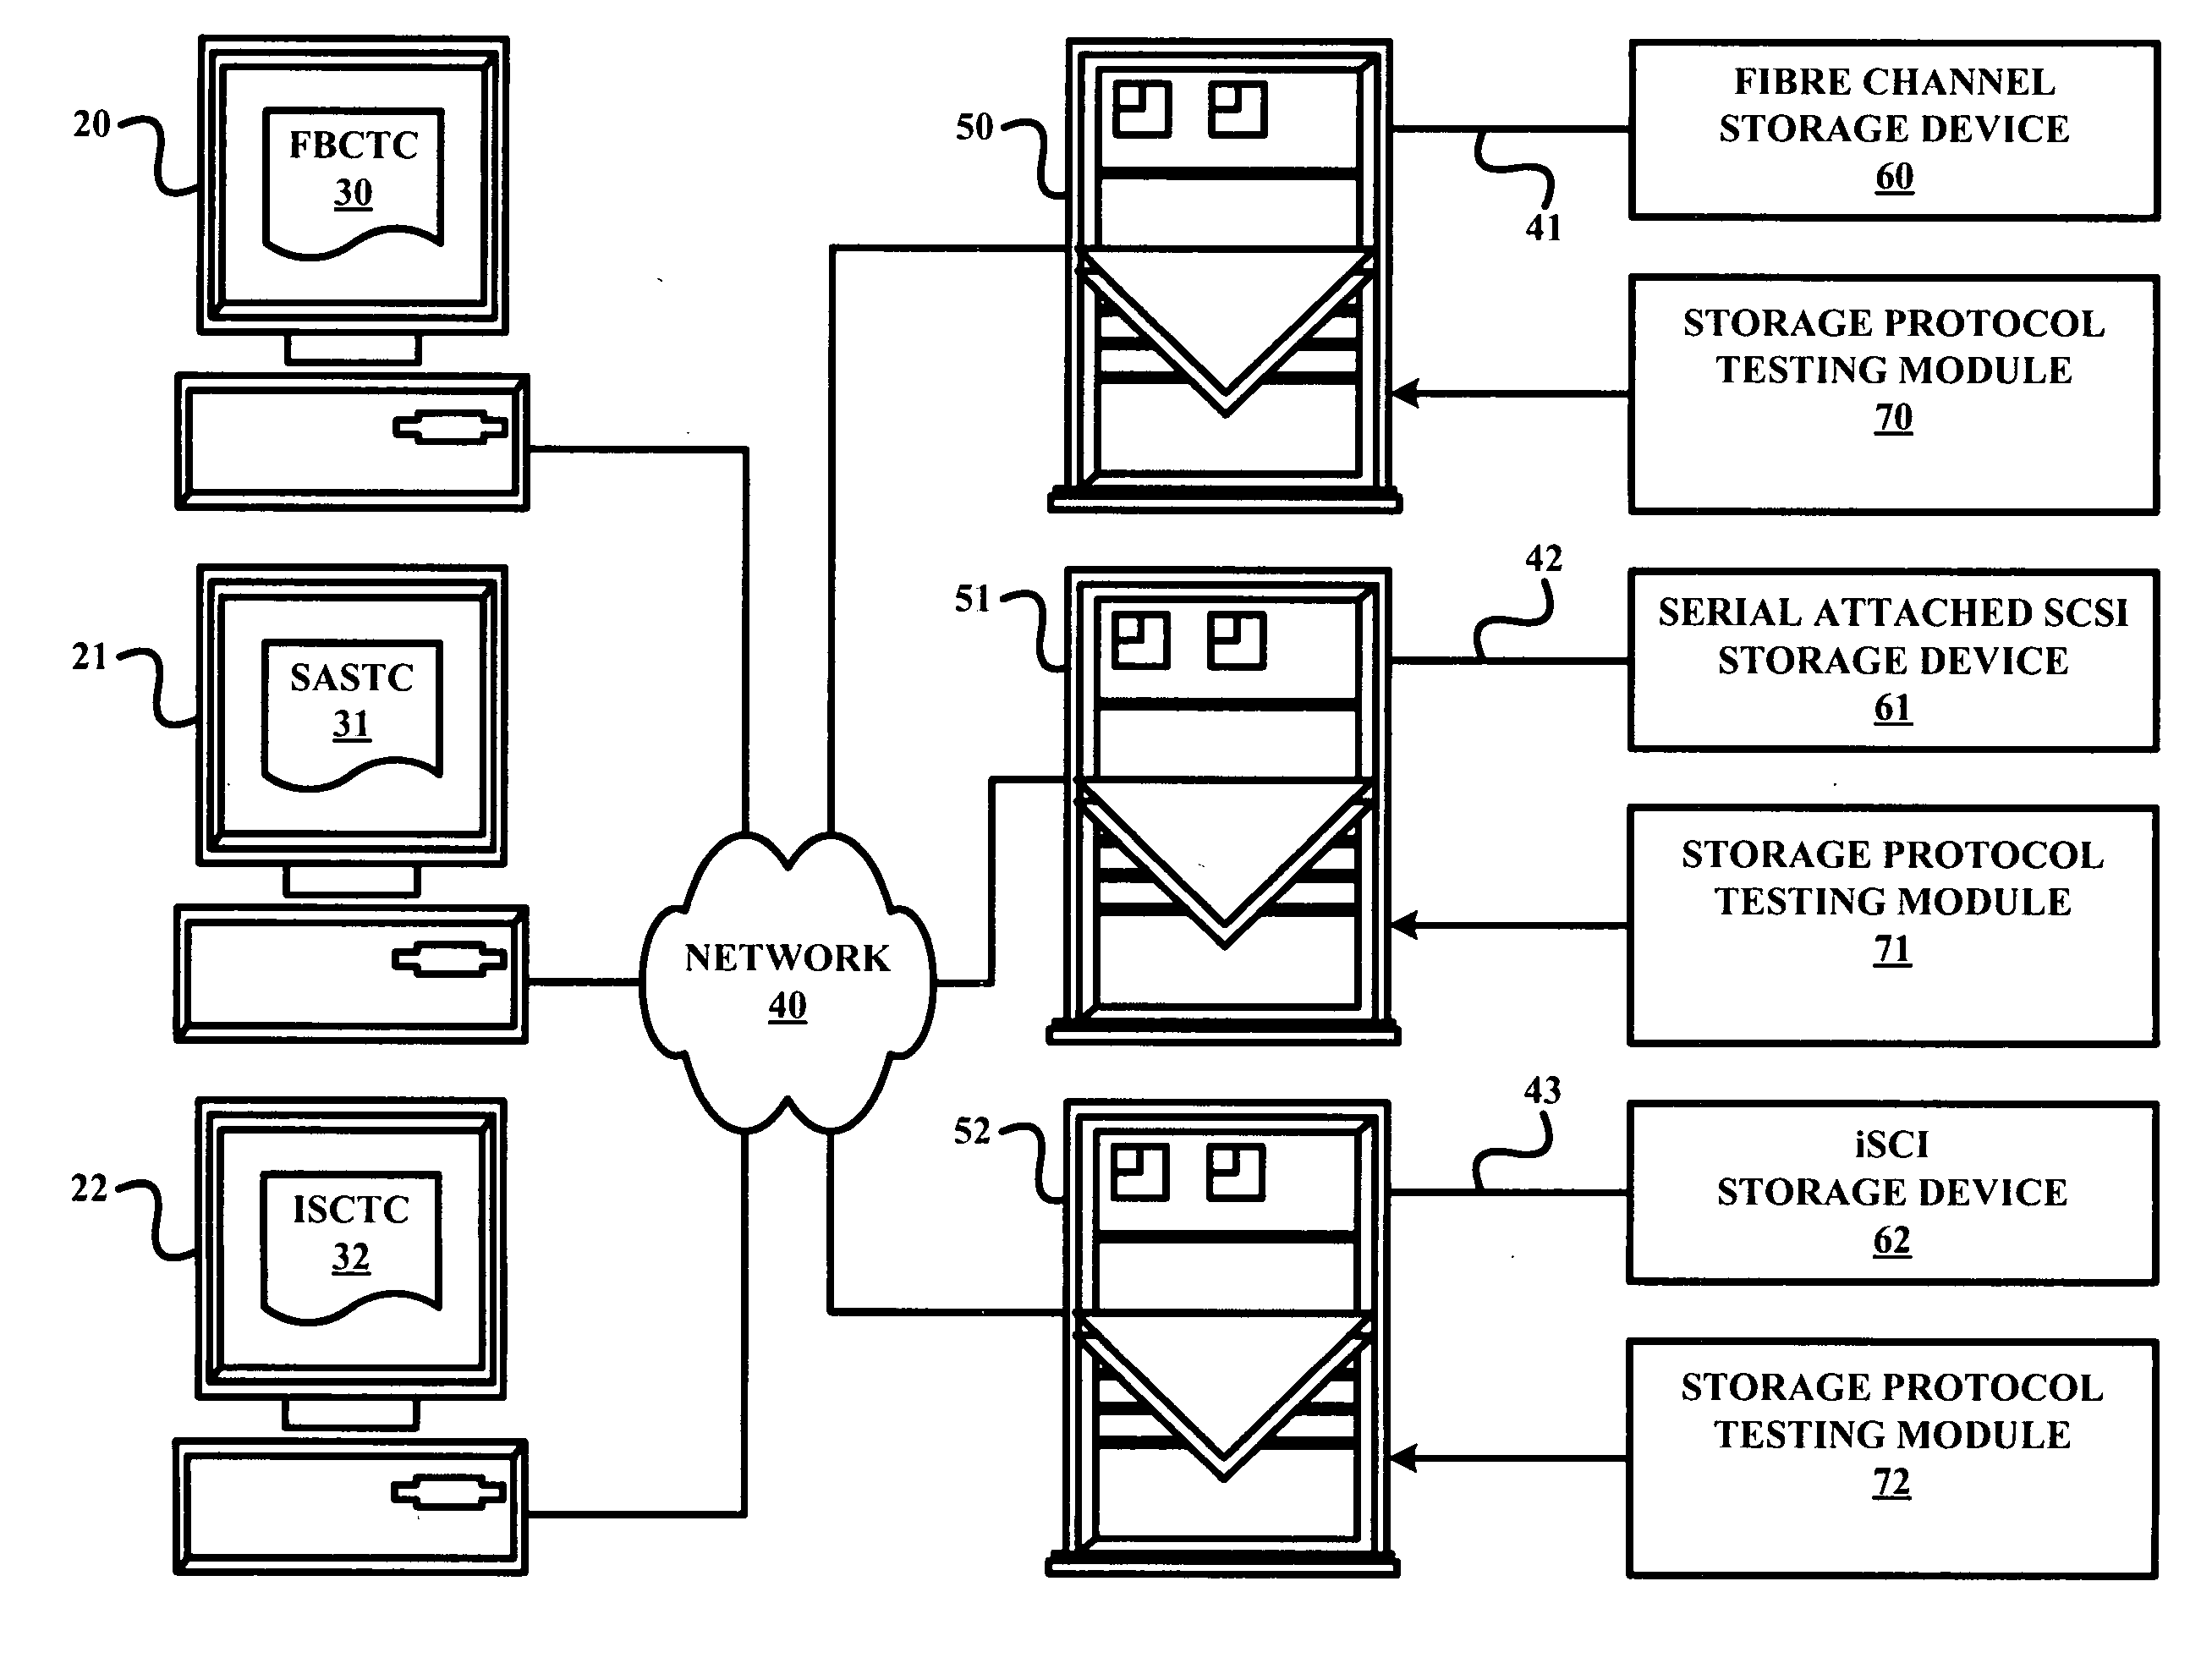 Multilayered architecture for storage protocol conformance testing of storage devices